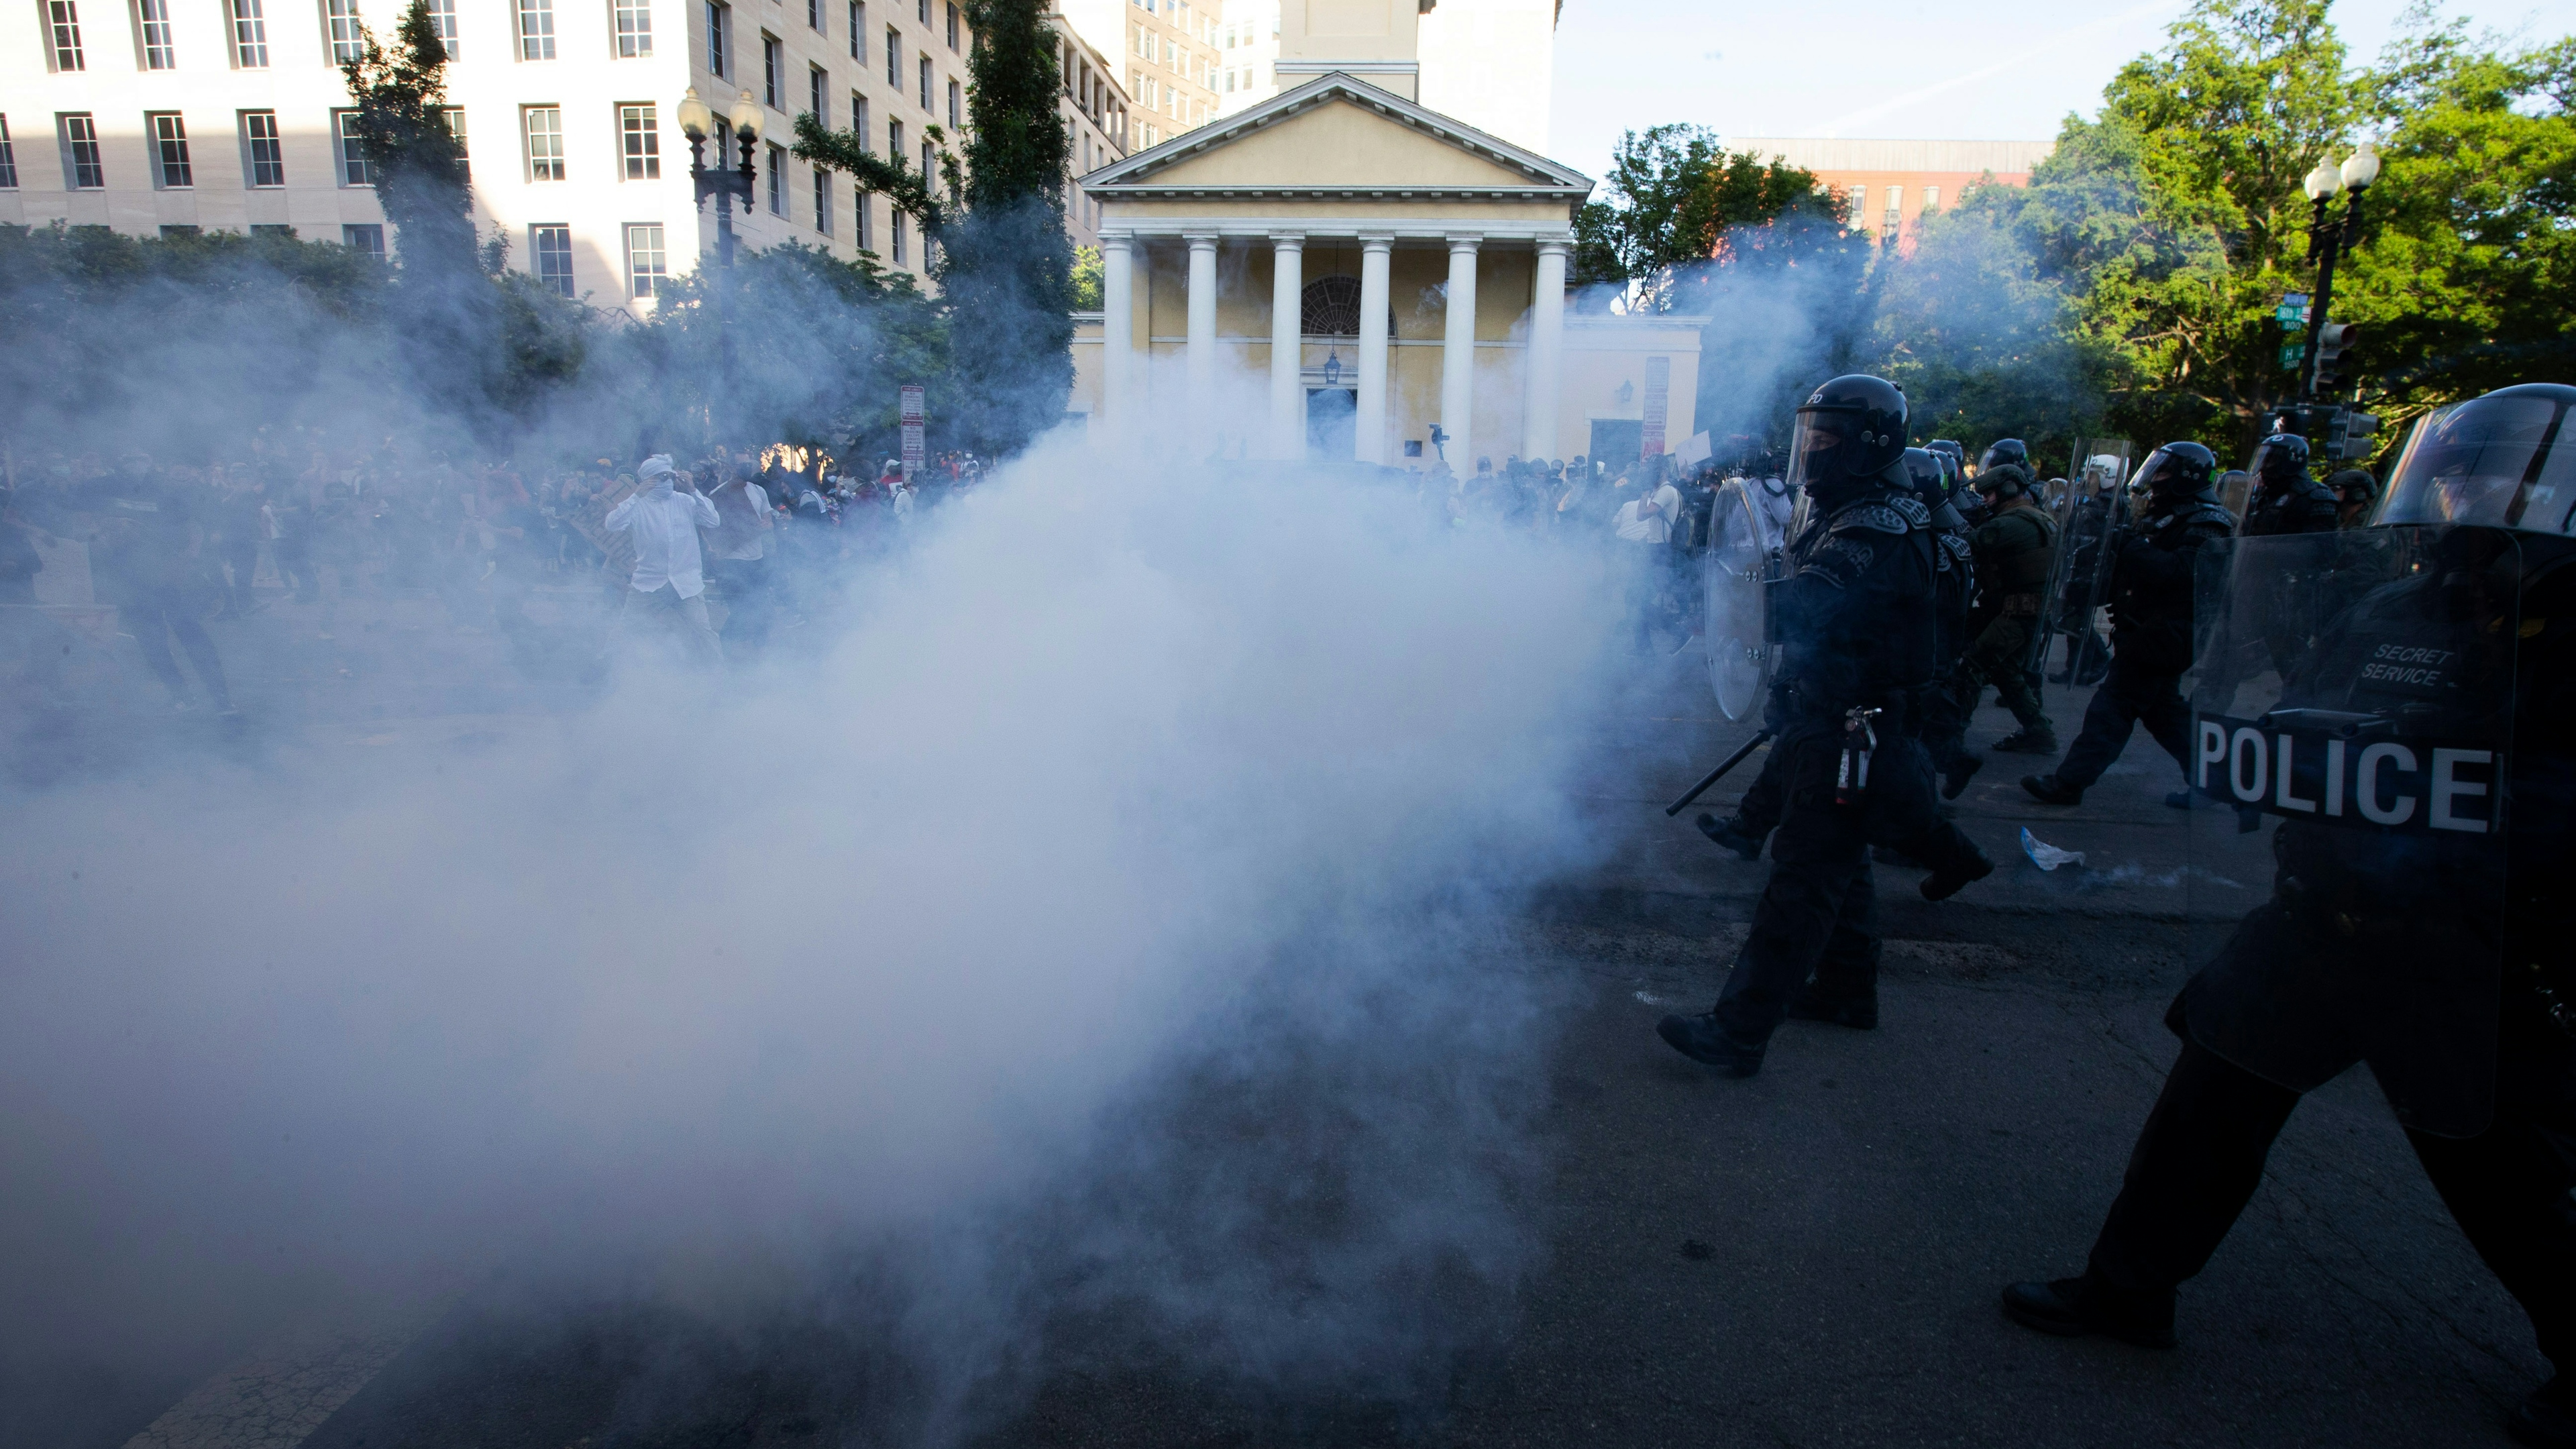 Police officers wearing riot gear push back demonstrators shooting tear gas next to St. John's Episcopal Church outside of the White House on June 1, 2020.